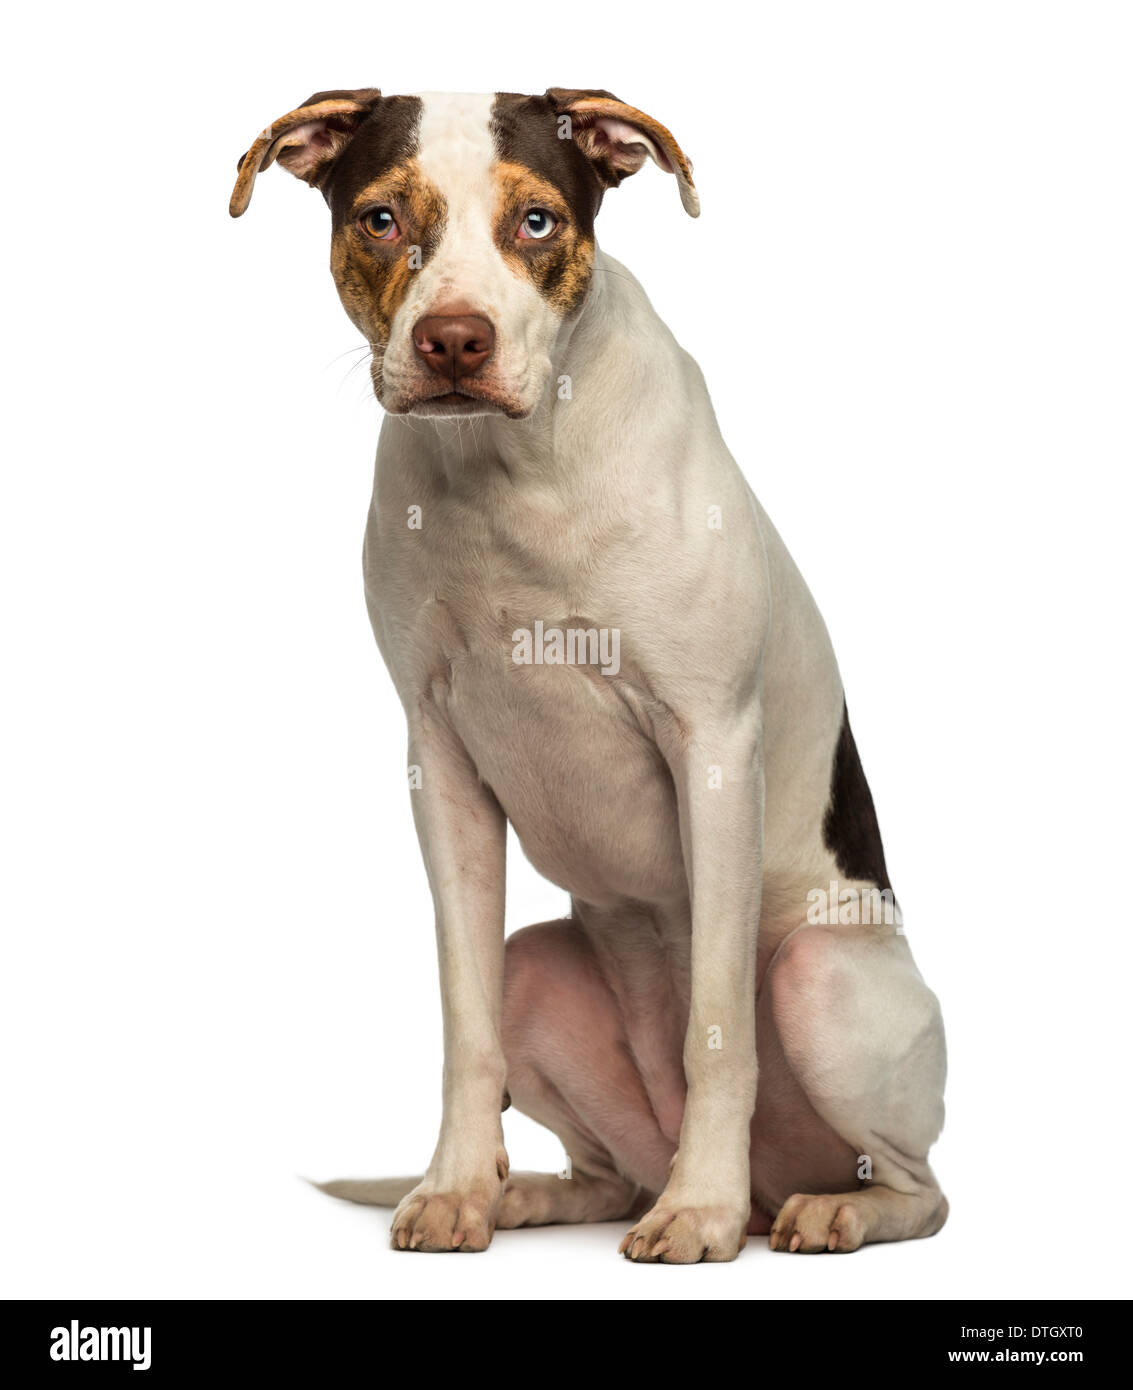 Crossbreed dog sitting, looking at the camera against white background Stock Photo